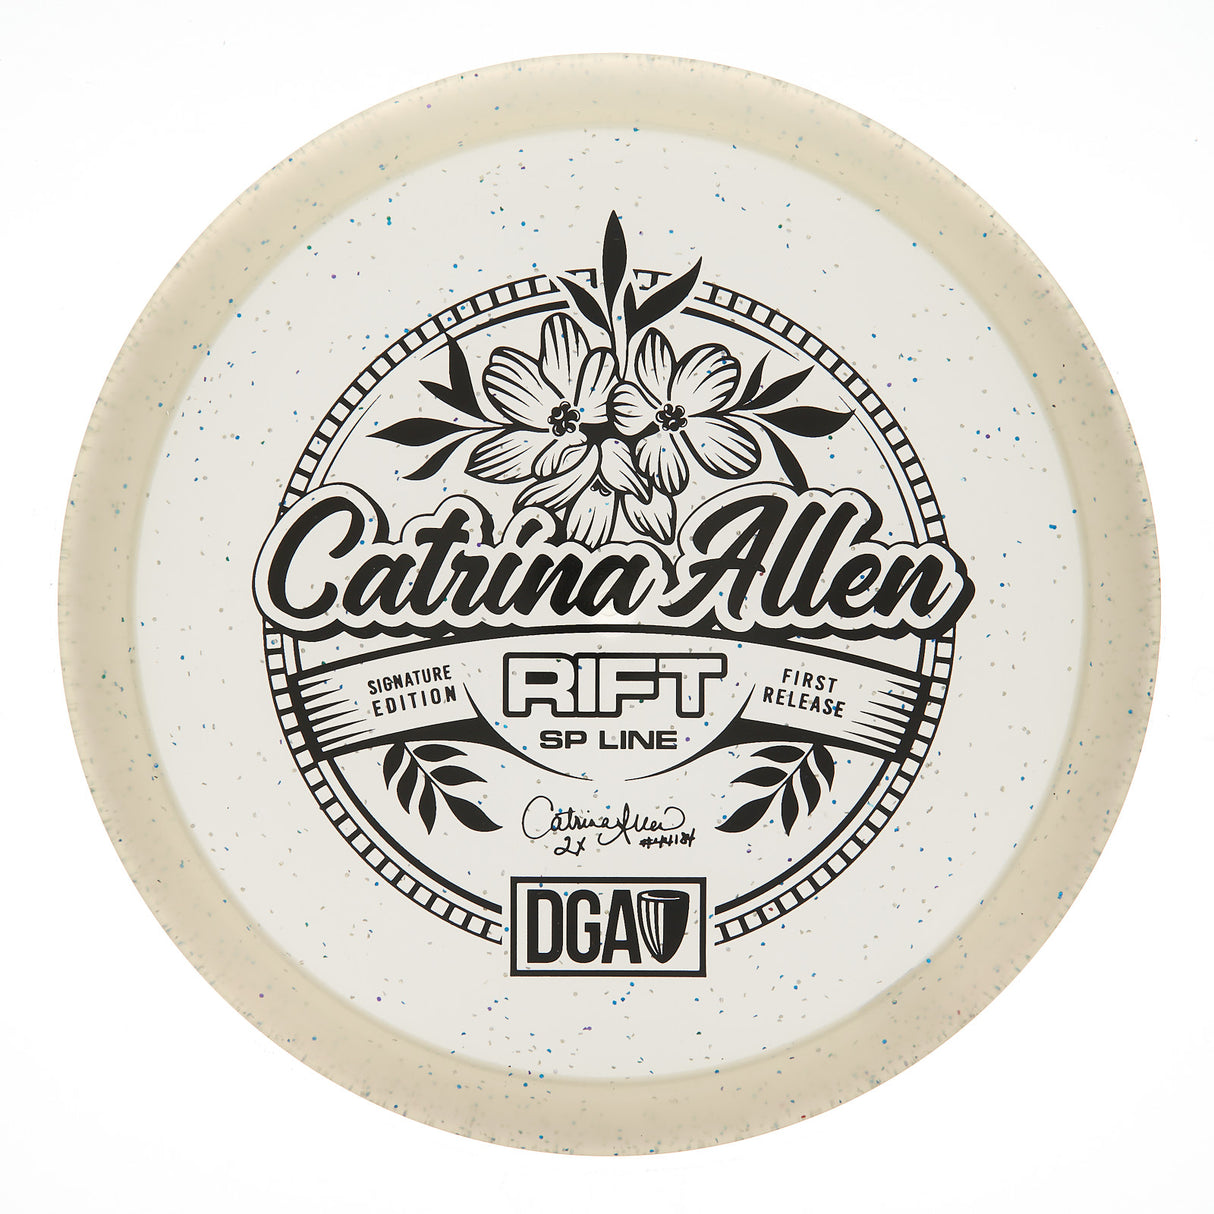 DGA Rift - Catrina Allen Signature Edition First Release SP Line 177g | Style 0004